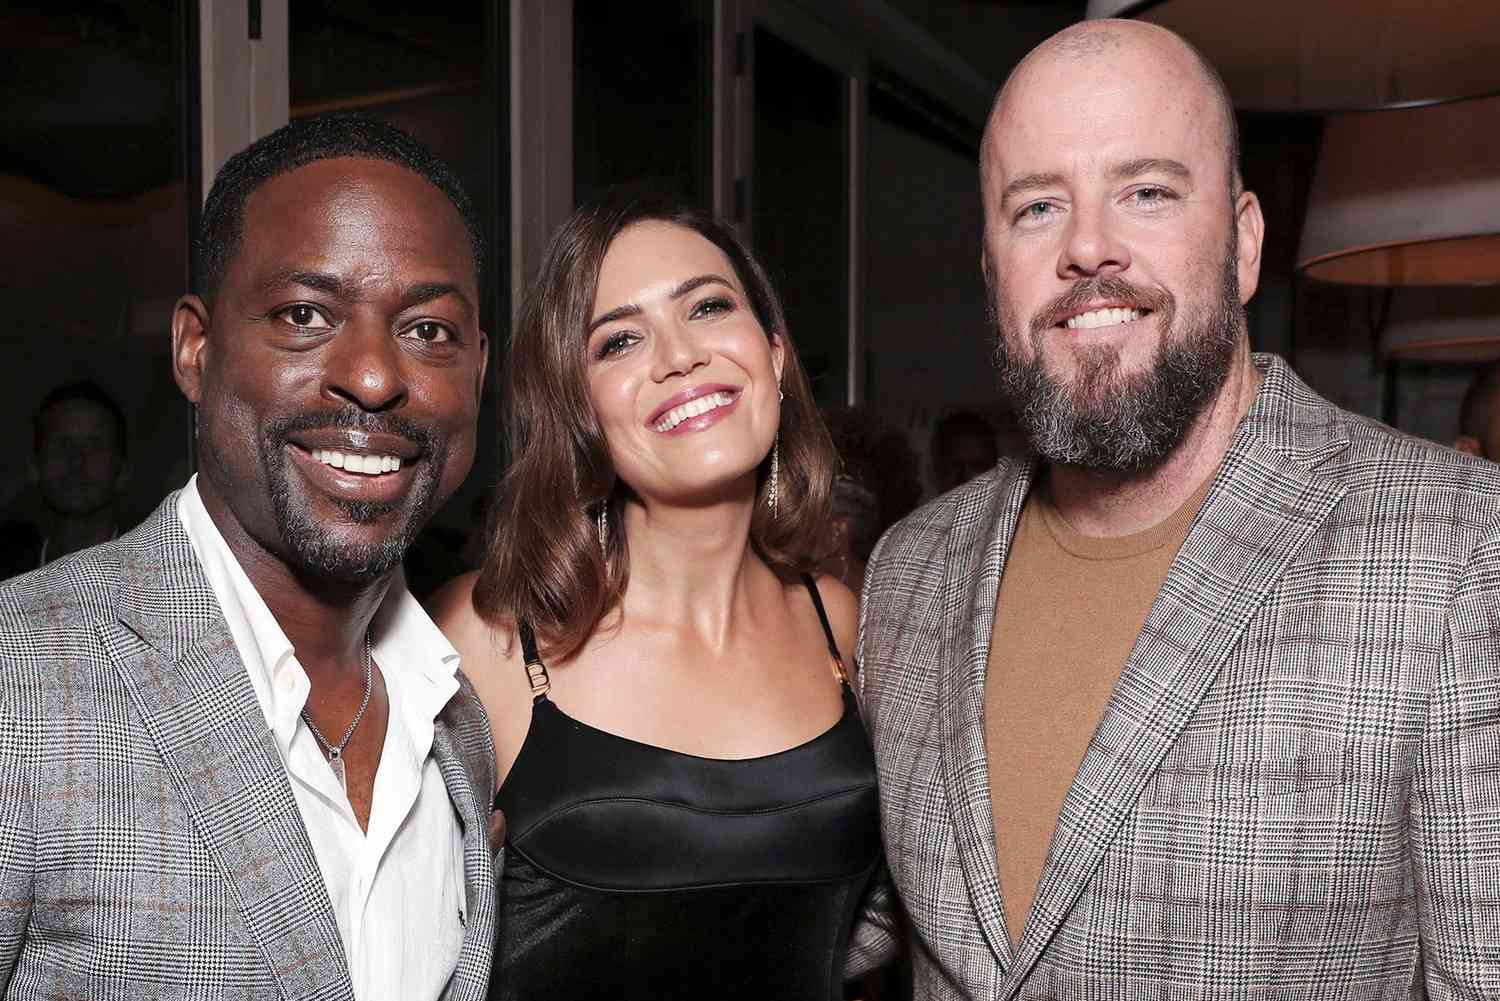 Mandy Moore, Sterling K. Brown and Chris Sullivan Dish on 'Gratifying' This Is Us Podcast and What Will 'Hit Hard' (Exclusive)